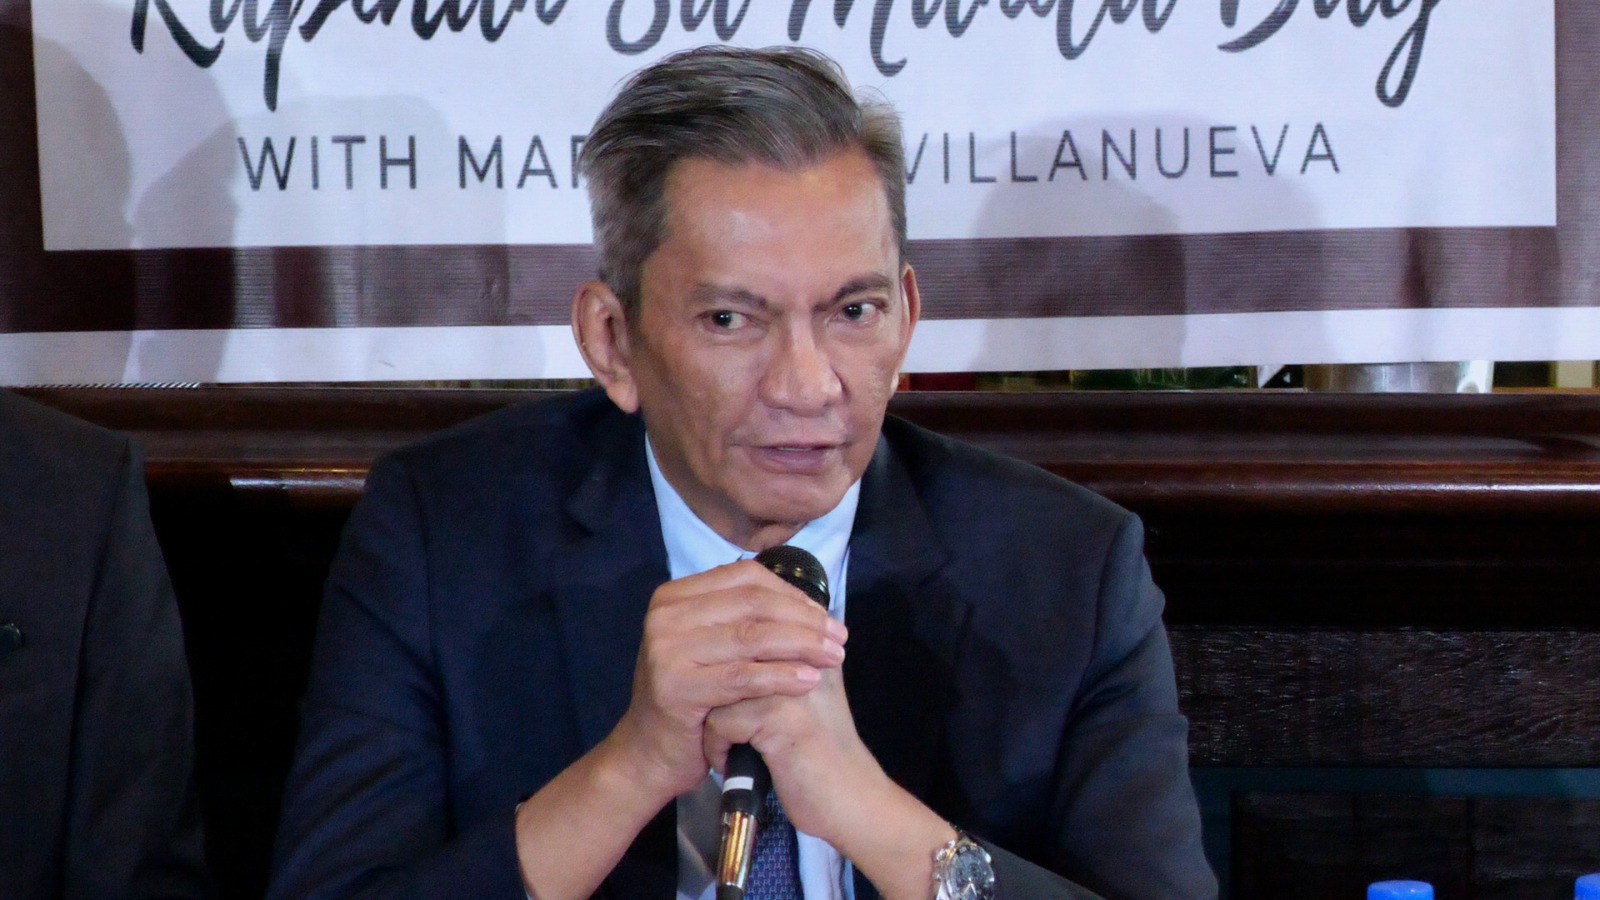 The Philippine Amusement and Gaming Corporation (Pagcor) has been modernizing its policies and strictly enforcing rules and regulations related to the Philippine Offshore Gaming Operations (Pogo), Albay 2nd District Rep. Joey Salceda said.